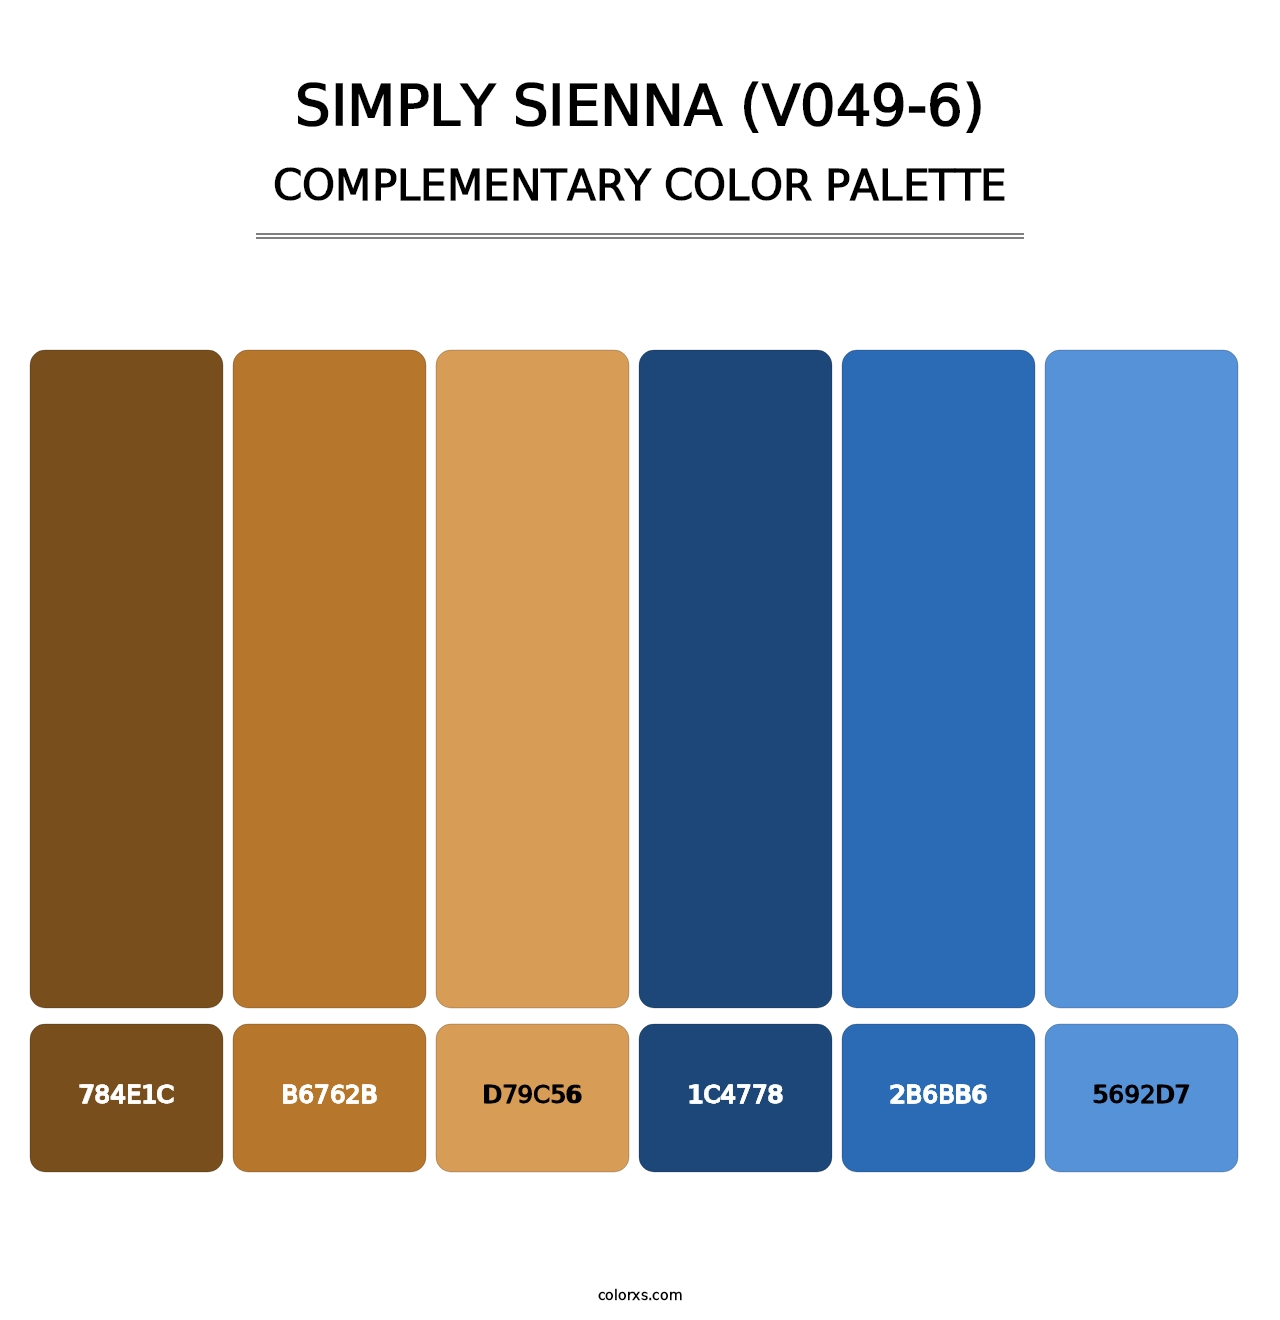 Simply Sienna (V049-6) - Complementary Color Palette